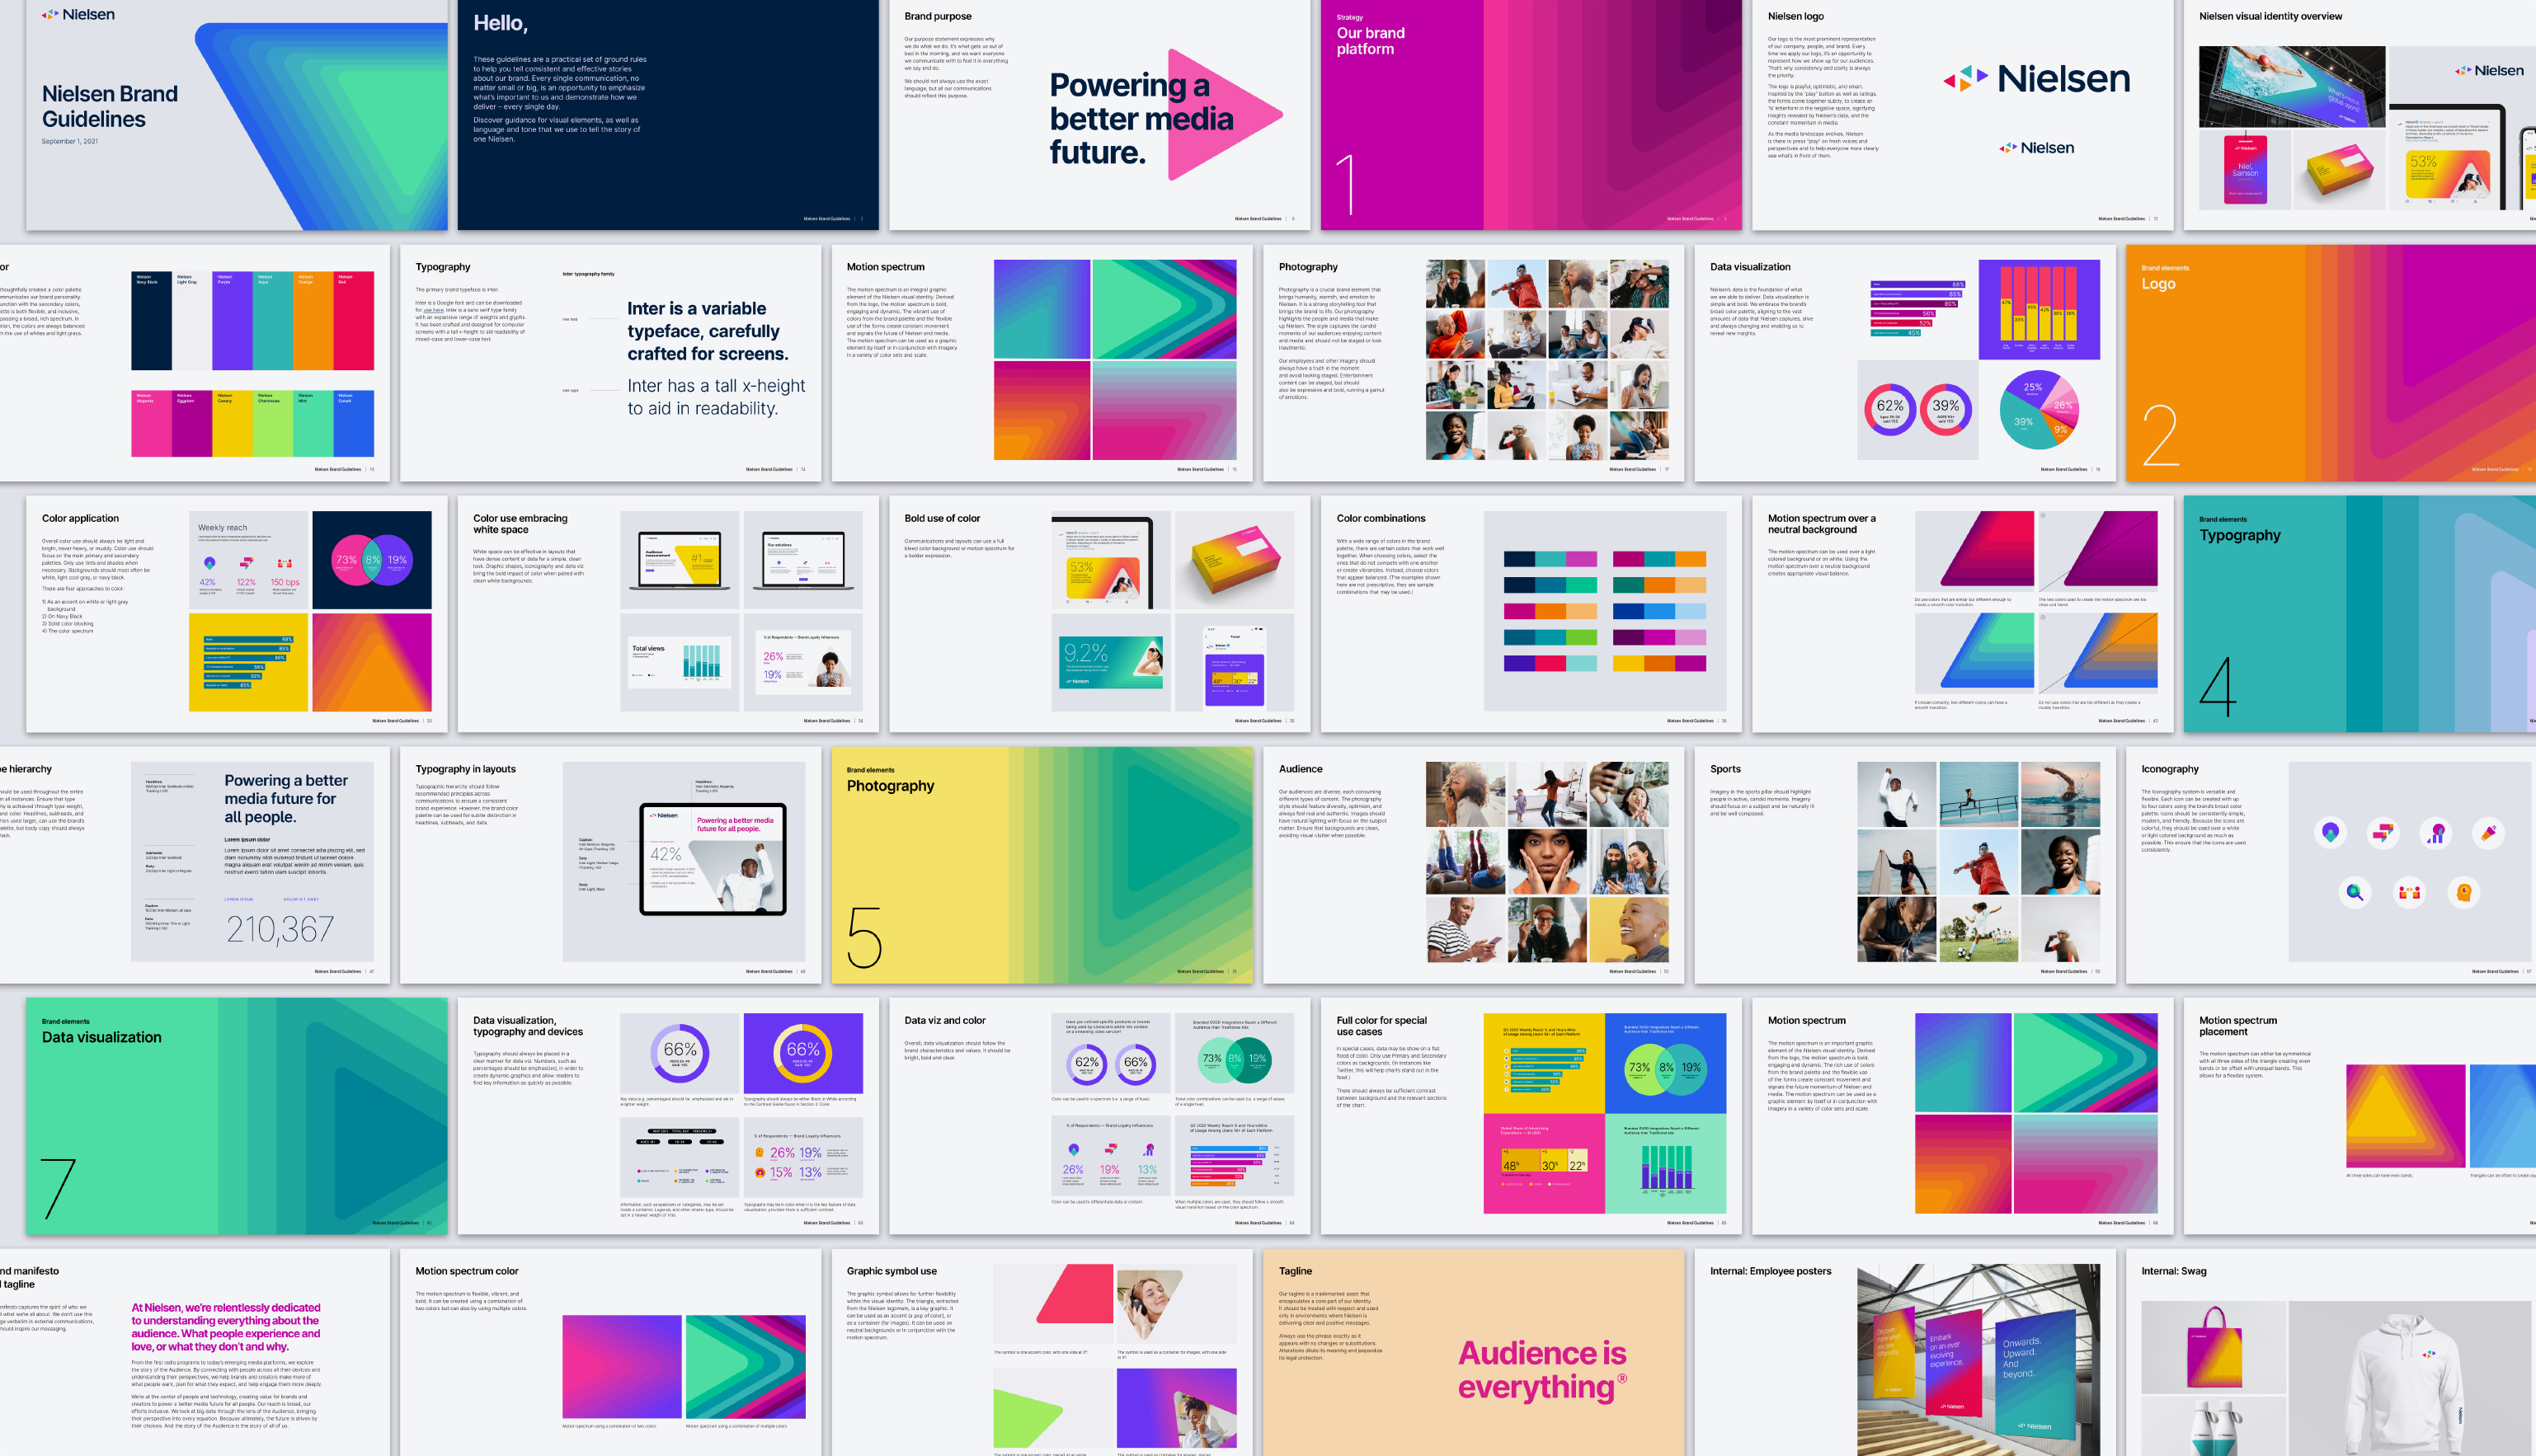 Nielsen’s new brand guidelines showcasing elements of their new brand identity